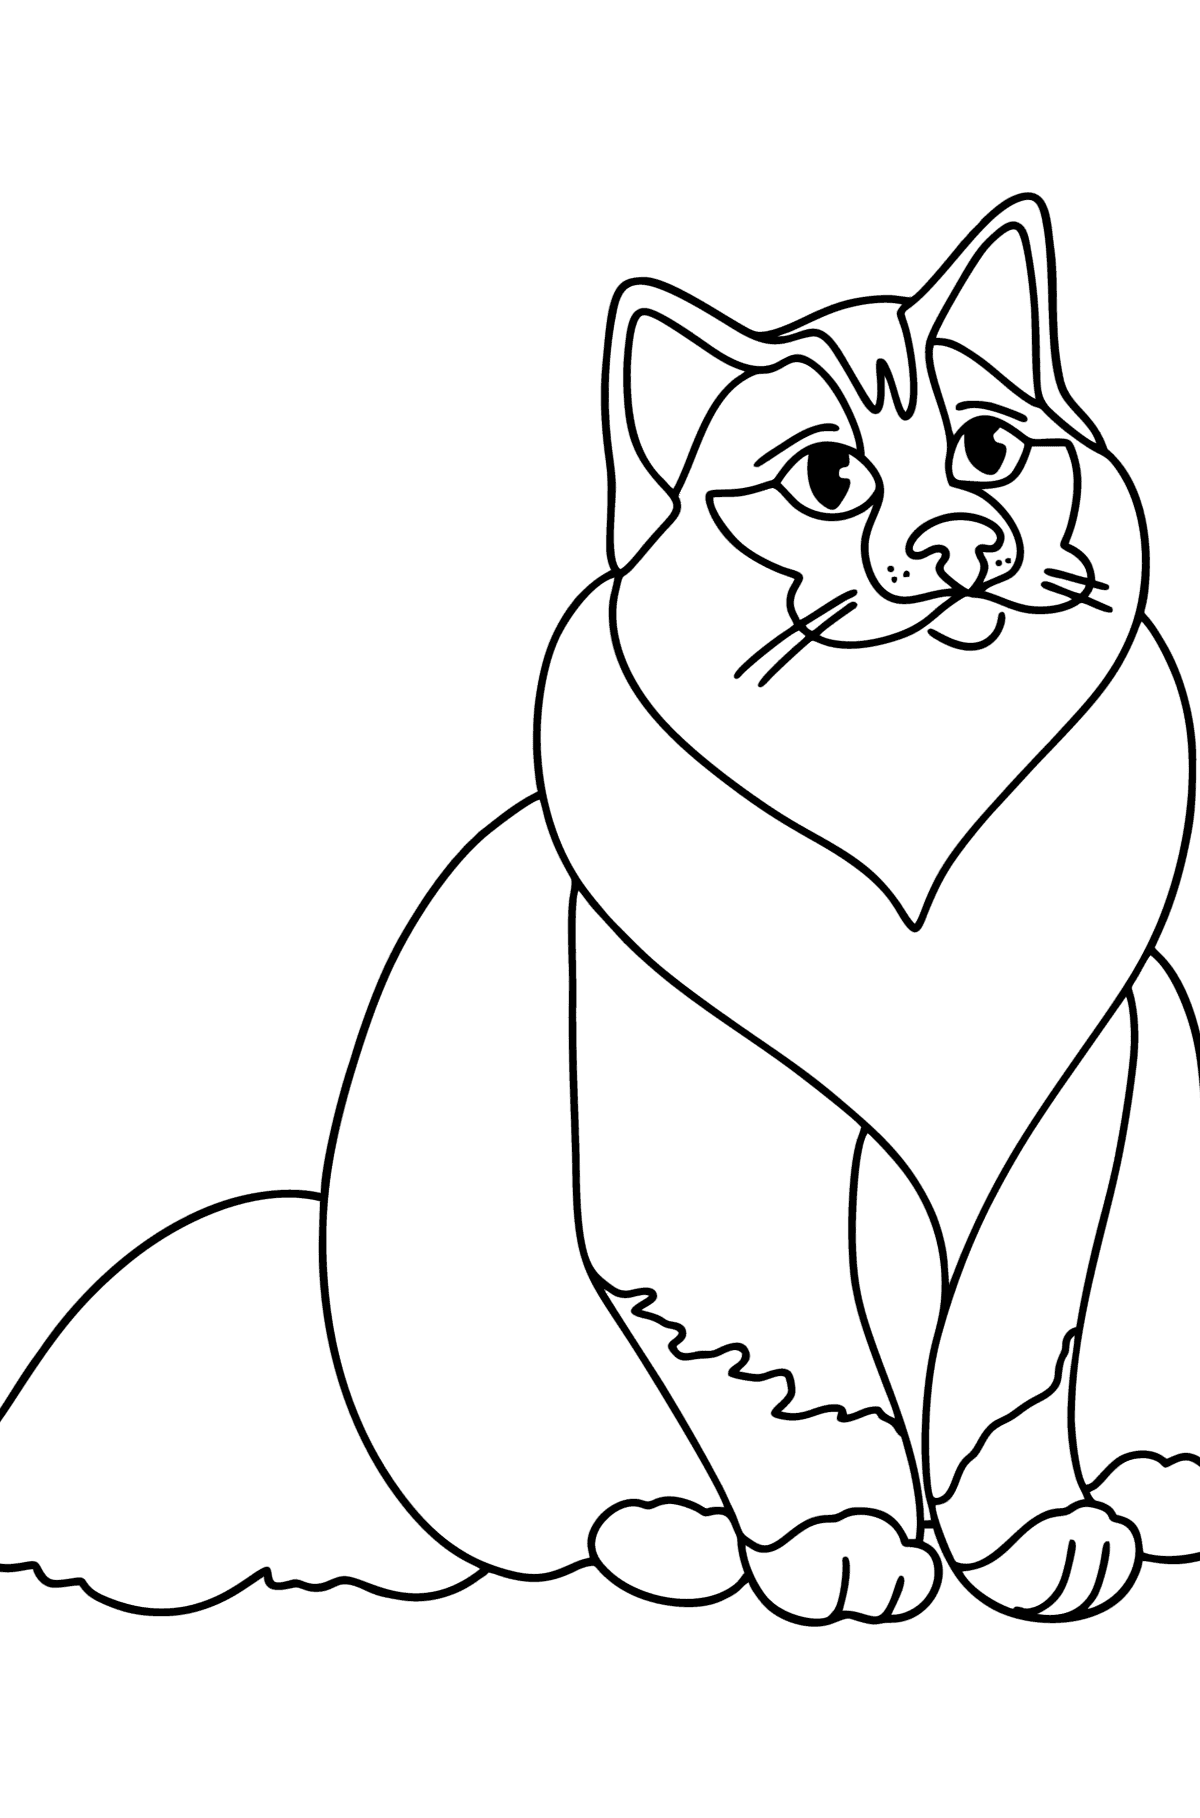 Burmese Cat coloring page - Coloring Pages for Kids